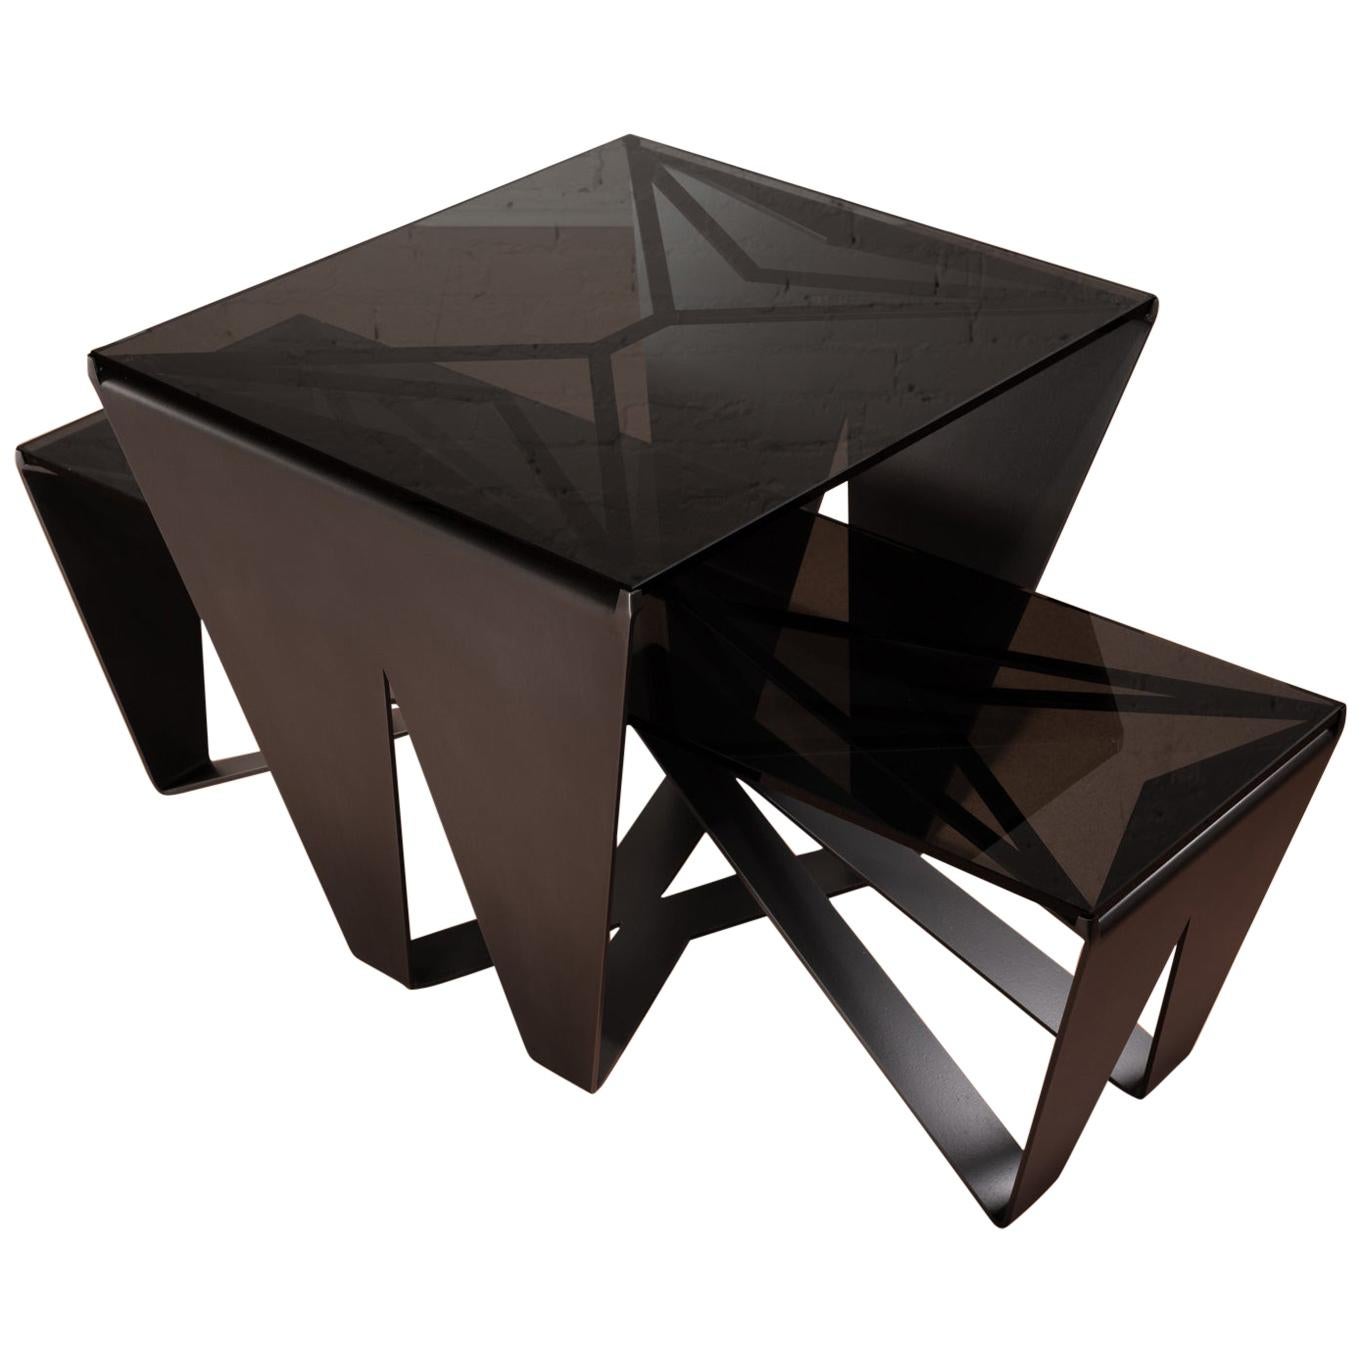 Nesting Domino Coffee Tables, Blackened Steel, Gray Glass, by Force/Collide For Sale